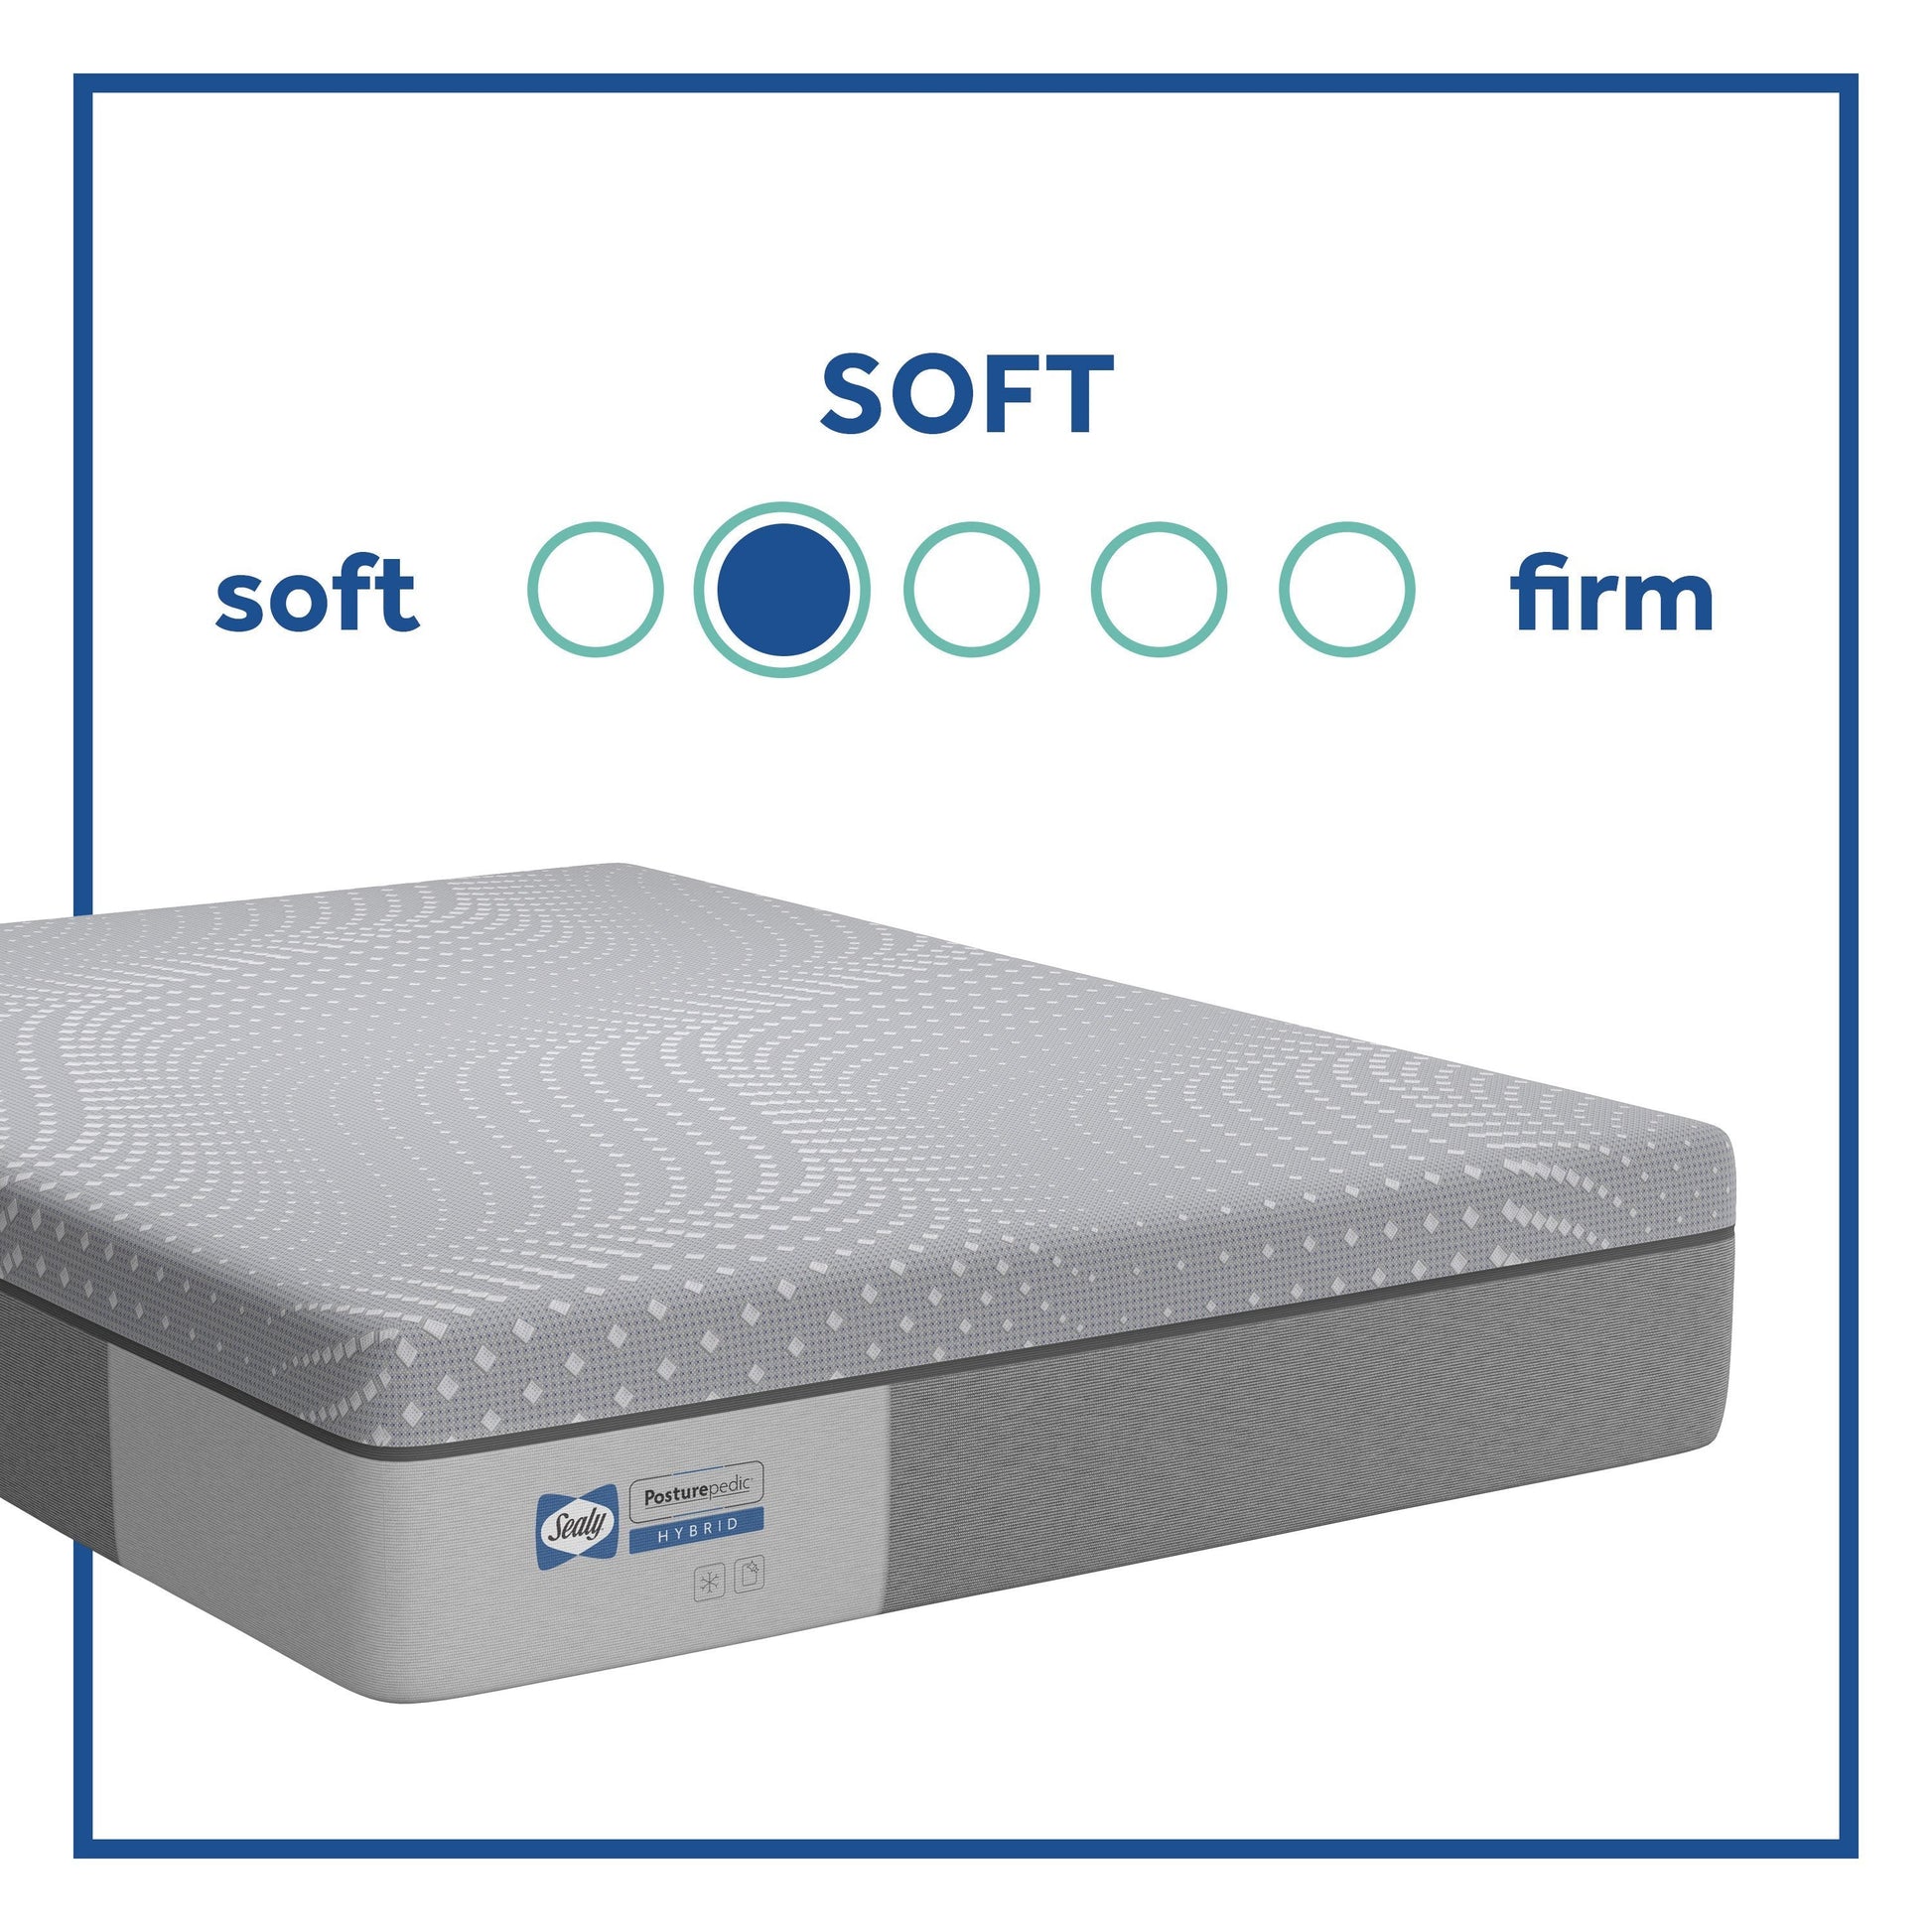 Sealy Hybrid Haralson Soft Mattress Comfort Guide